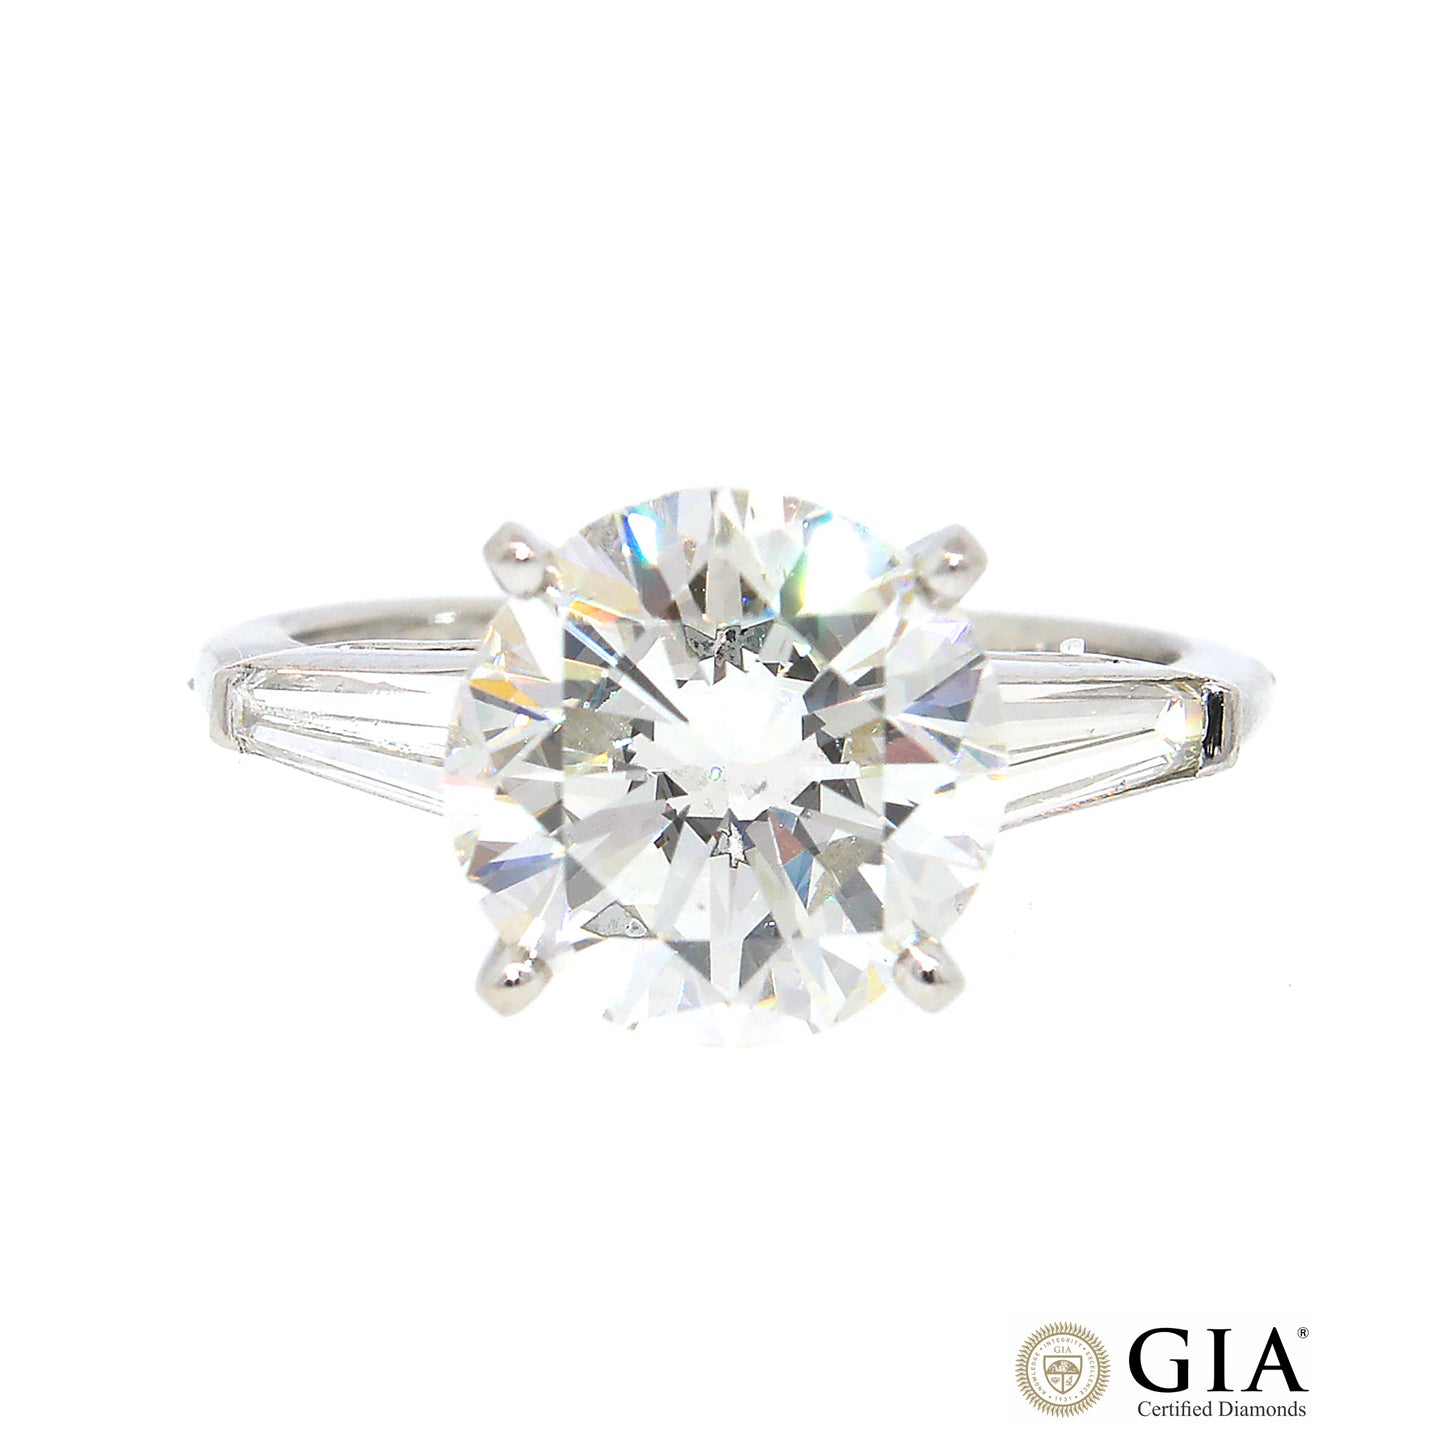 GIA Certified 4.03 carats Round Brilliant Diamond Engagement Ring Size 7